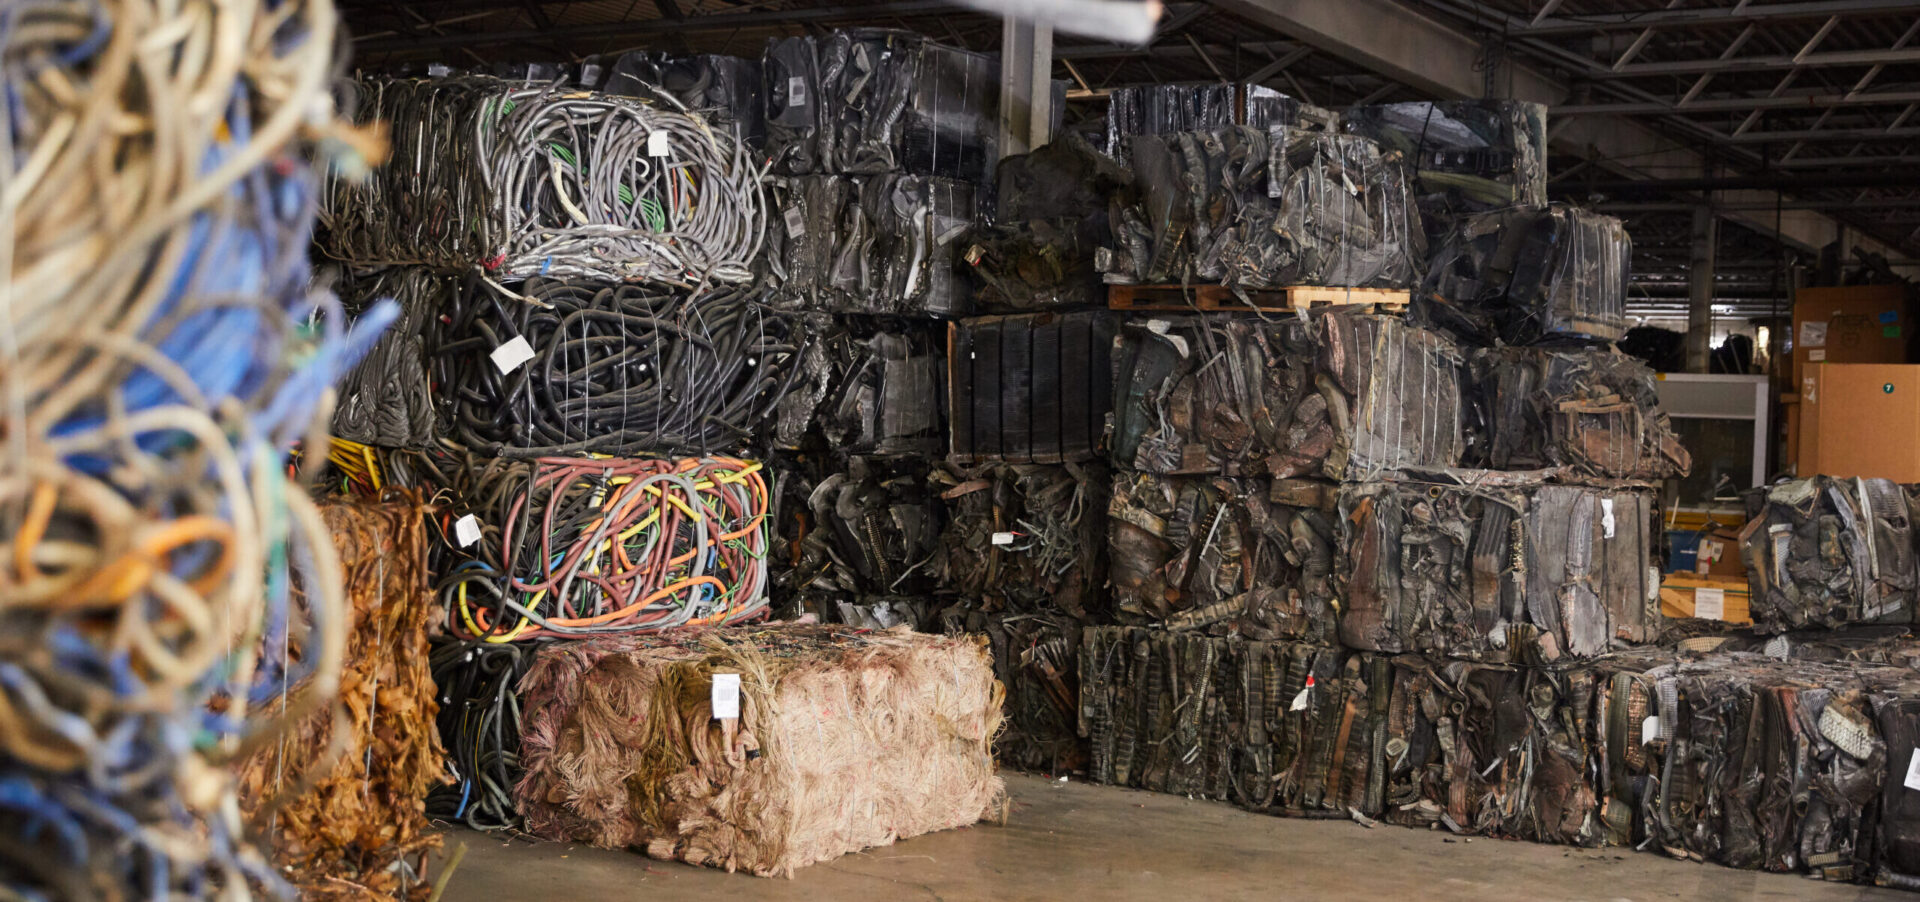 A room filled with lots of different types of wires.